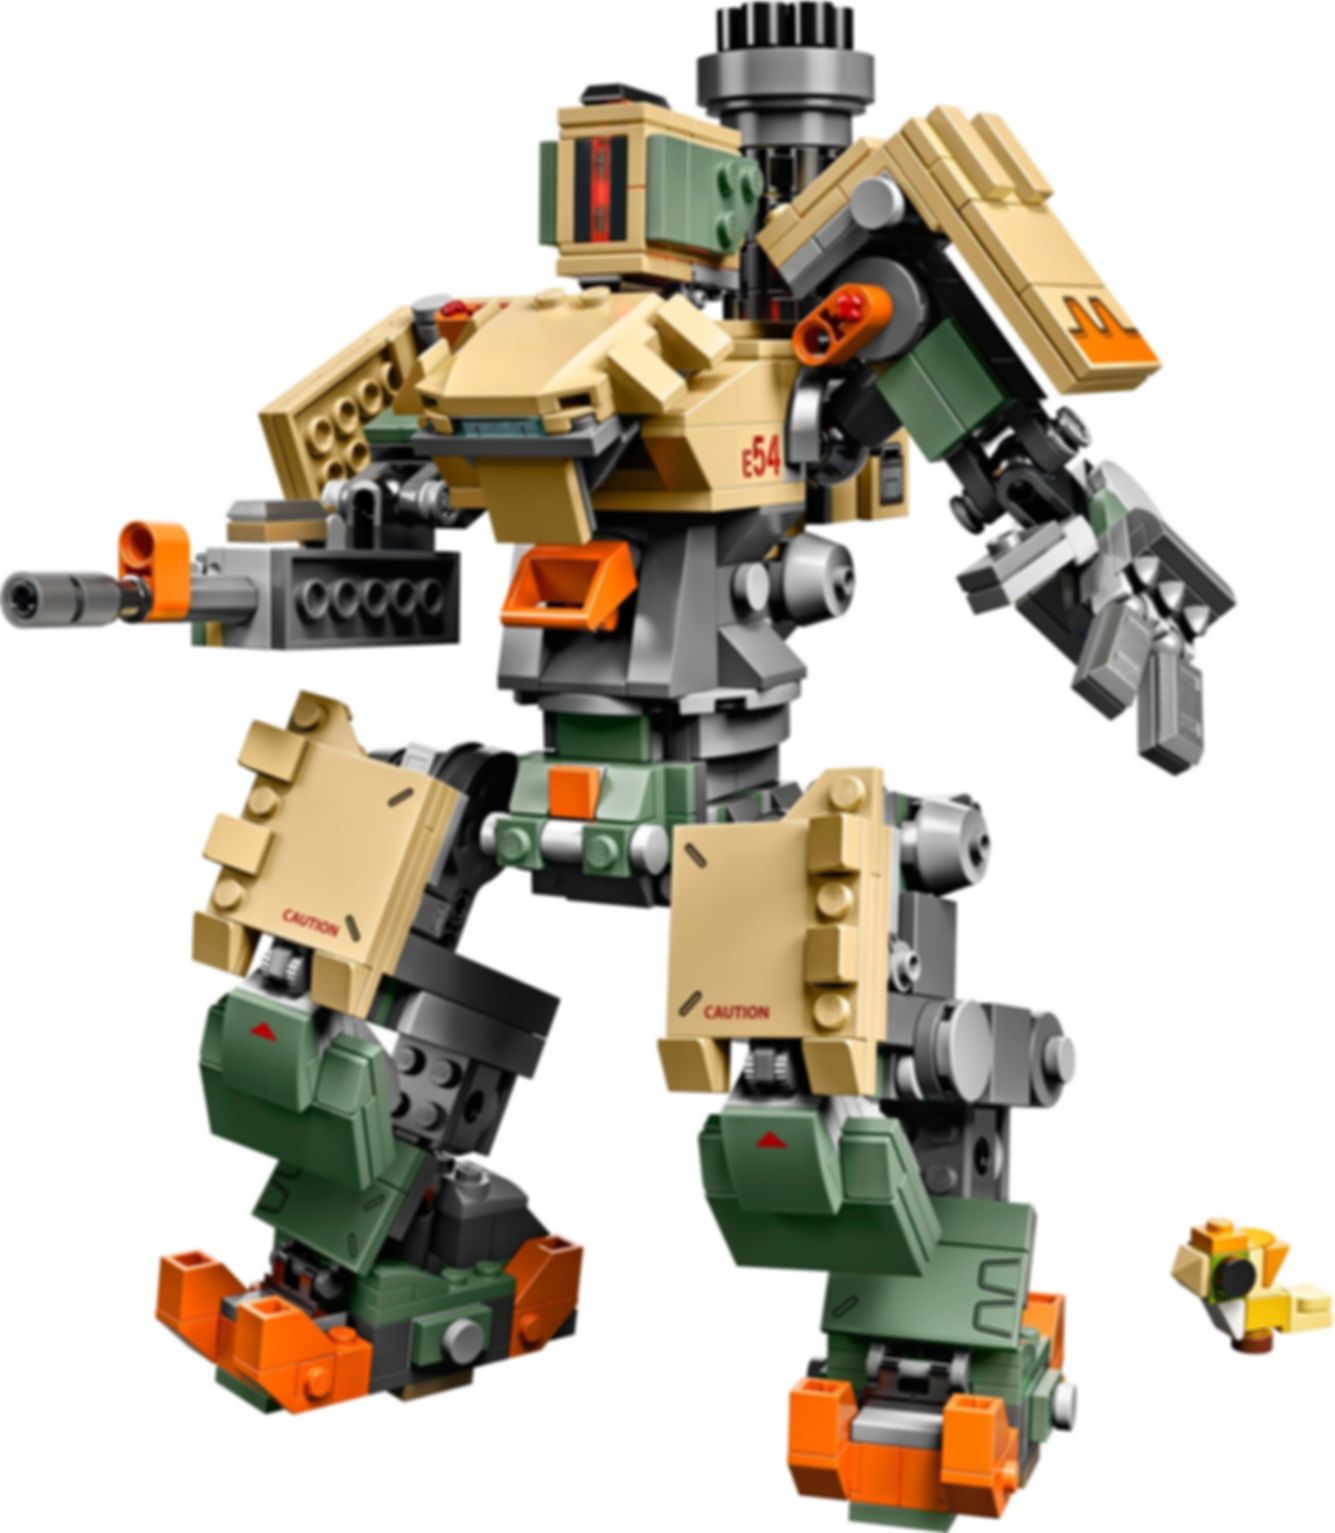 LEGO® Overwatch Bastion components